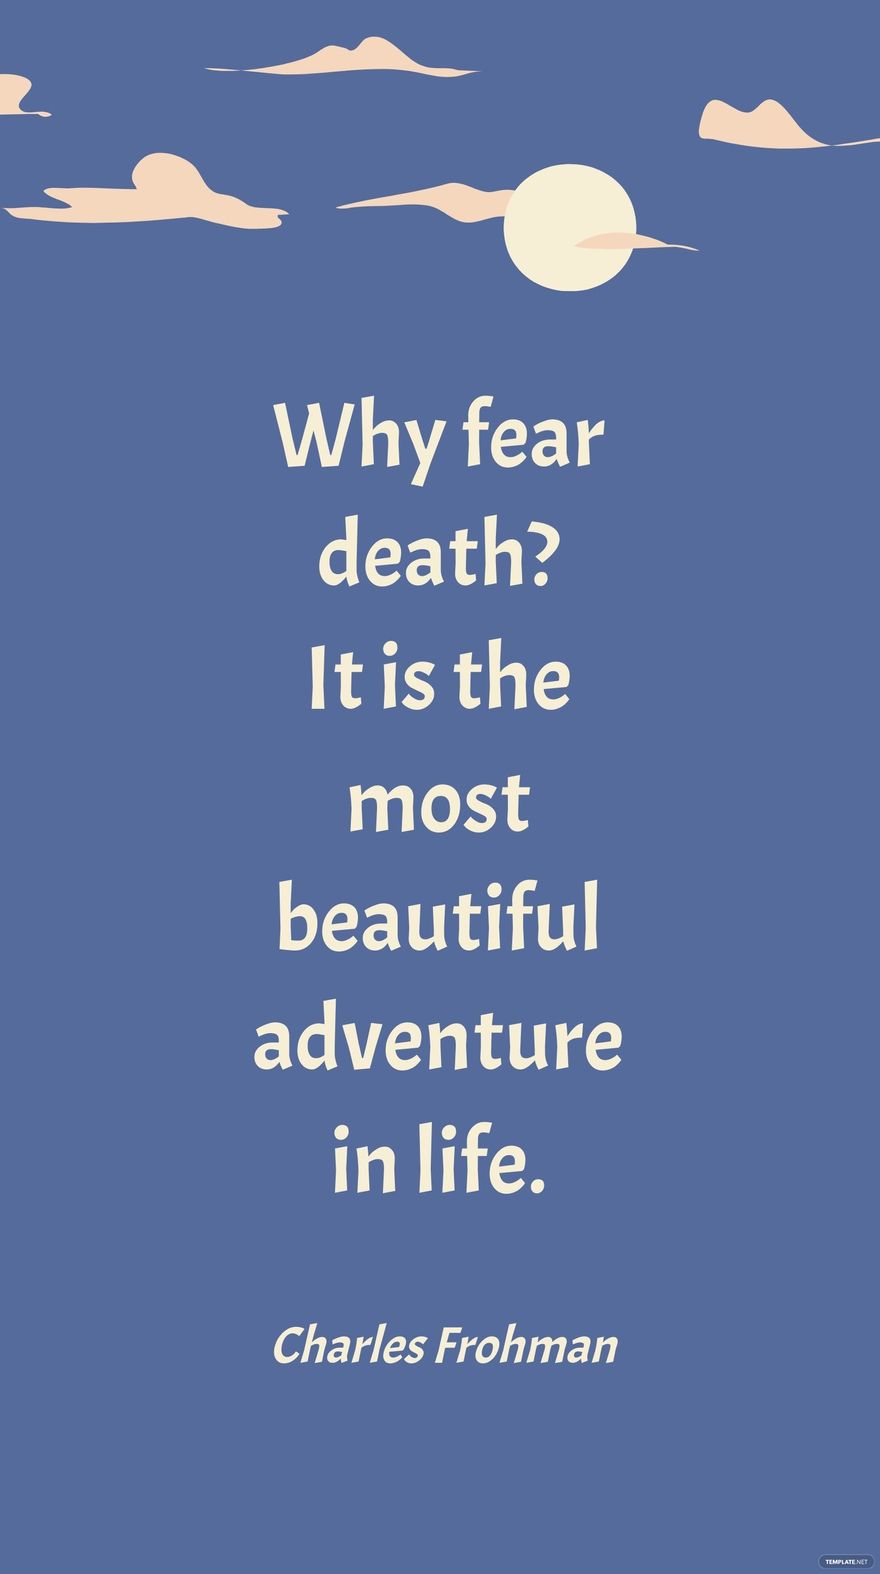 Charles Frohman - Why fear death? It is the most beautiful adventure in life.